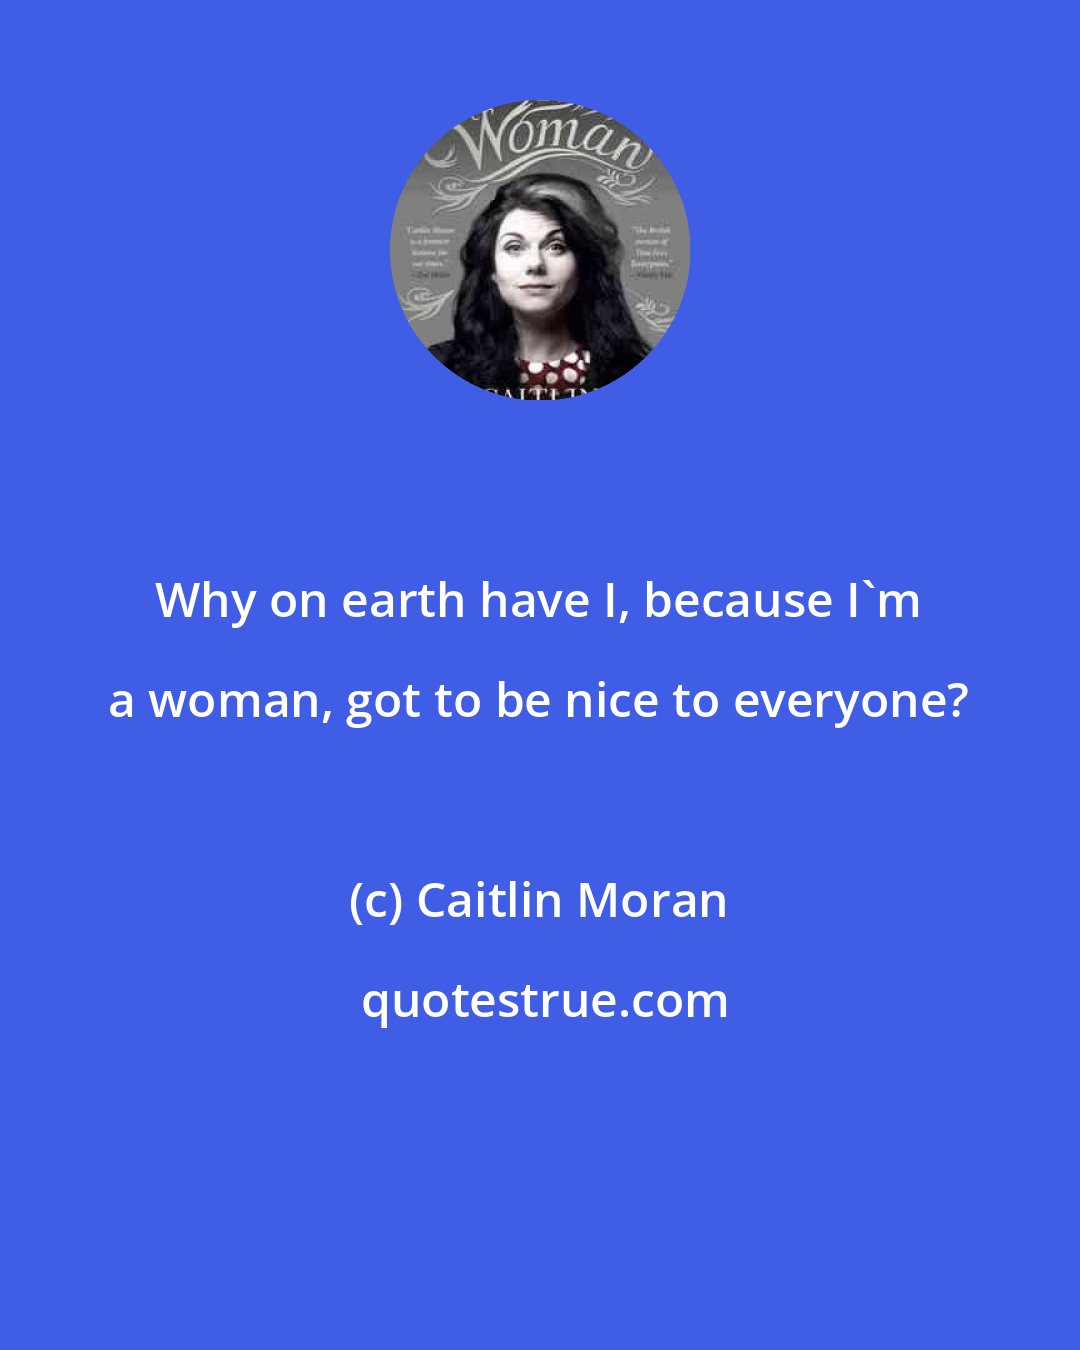 Caitlin Moran: Why on earth have I, because I'm a woman, got to be nice to everyone?